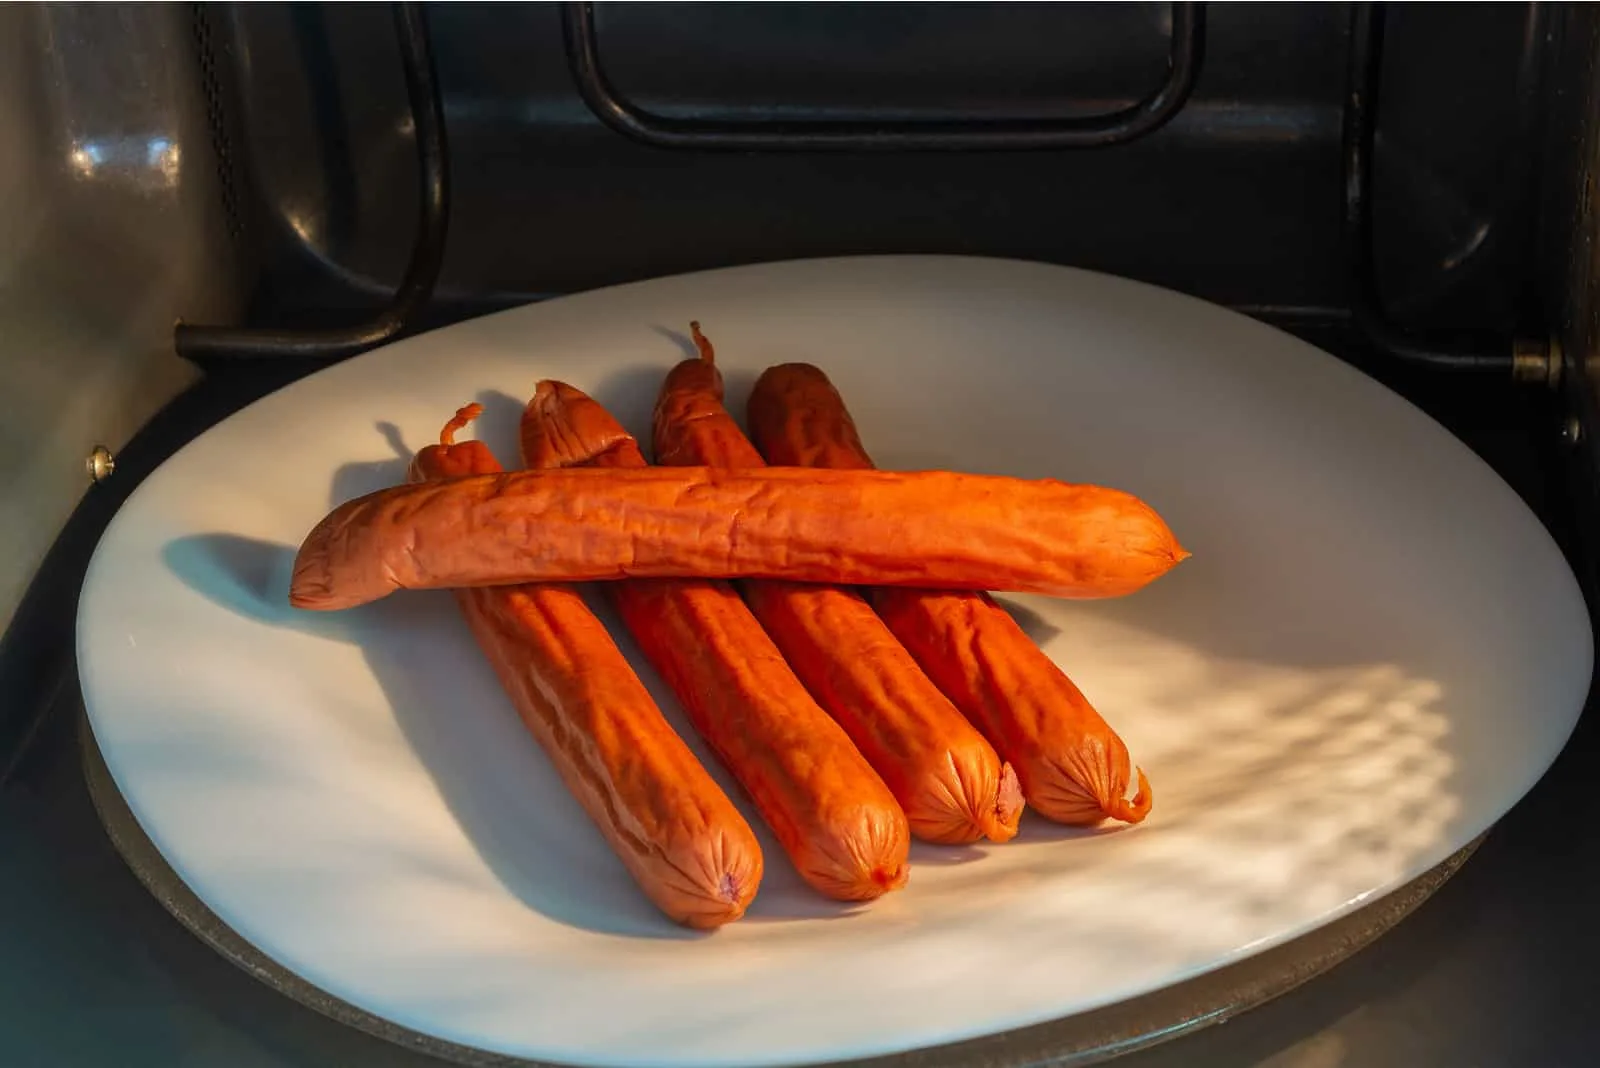 sausages for the dog in the microwave